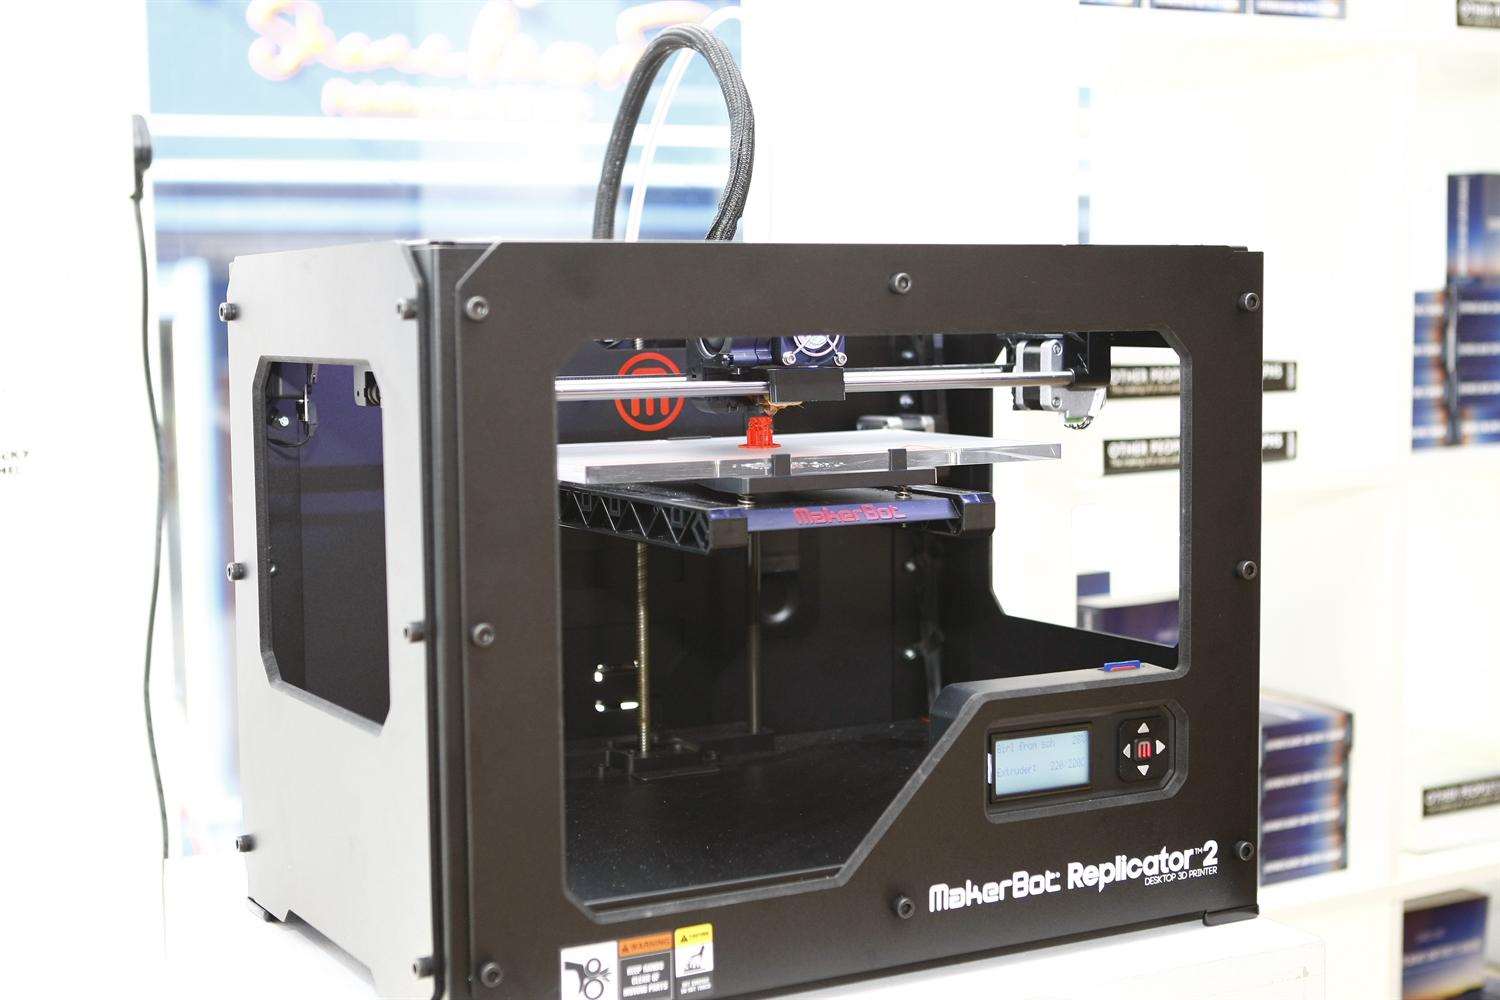 Similar 3D printers are used in industry. Picture: Matt Bristow